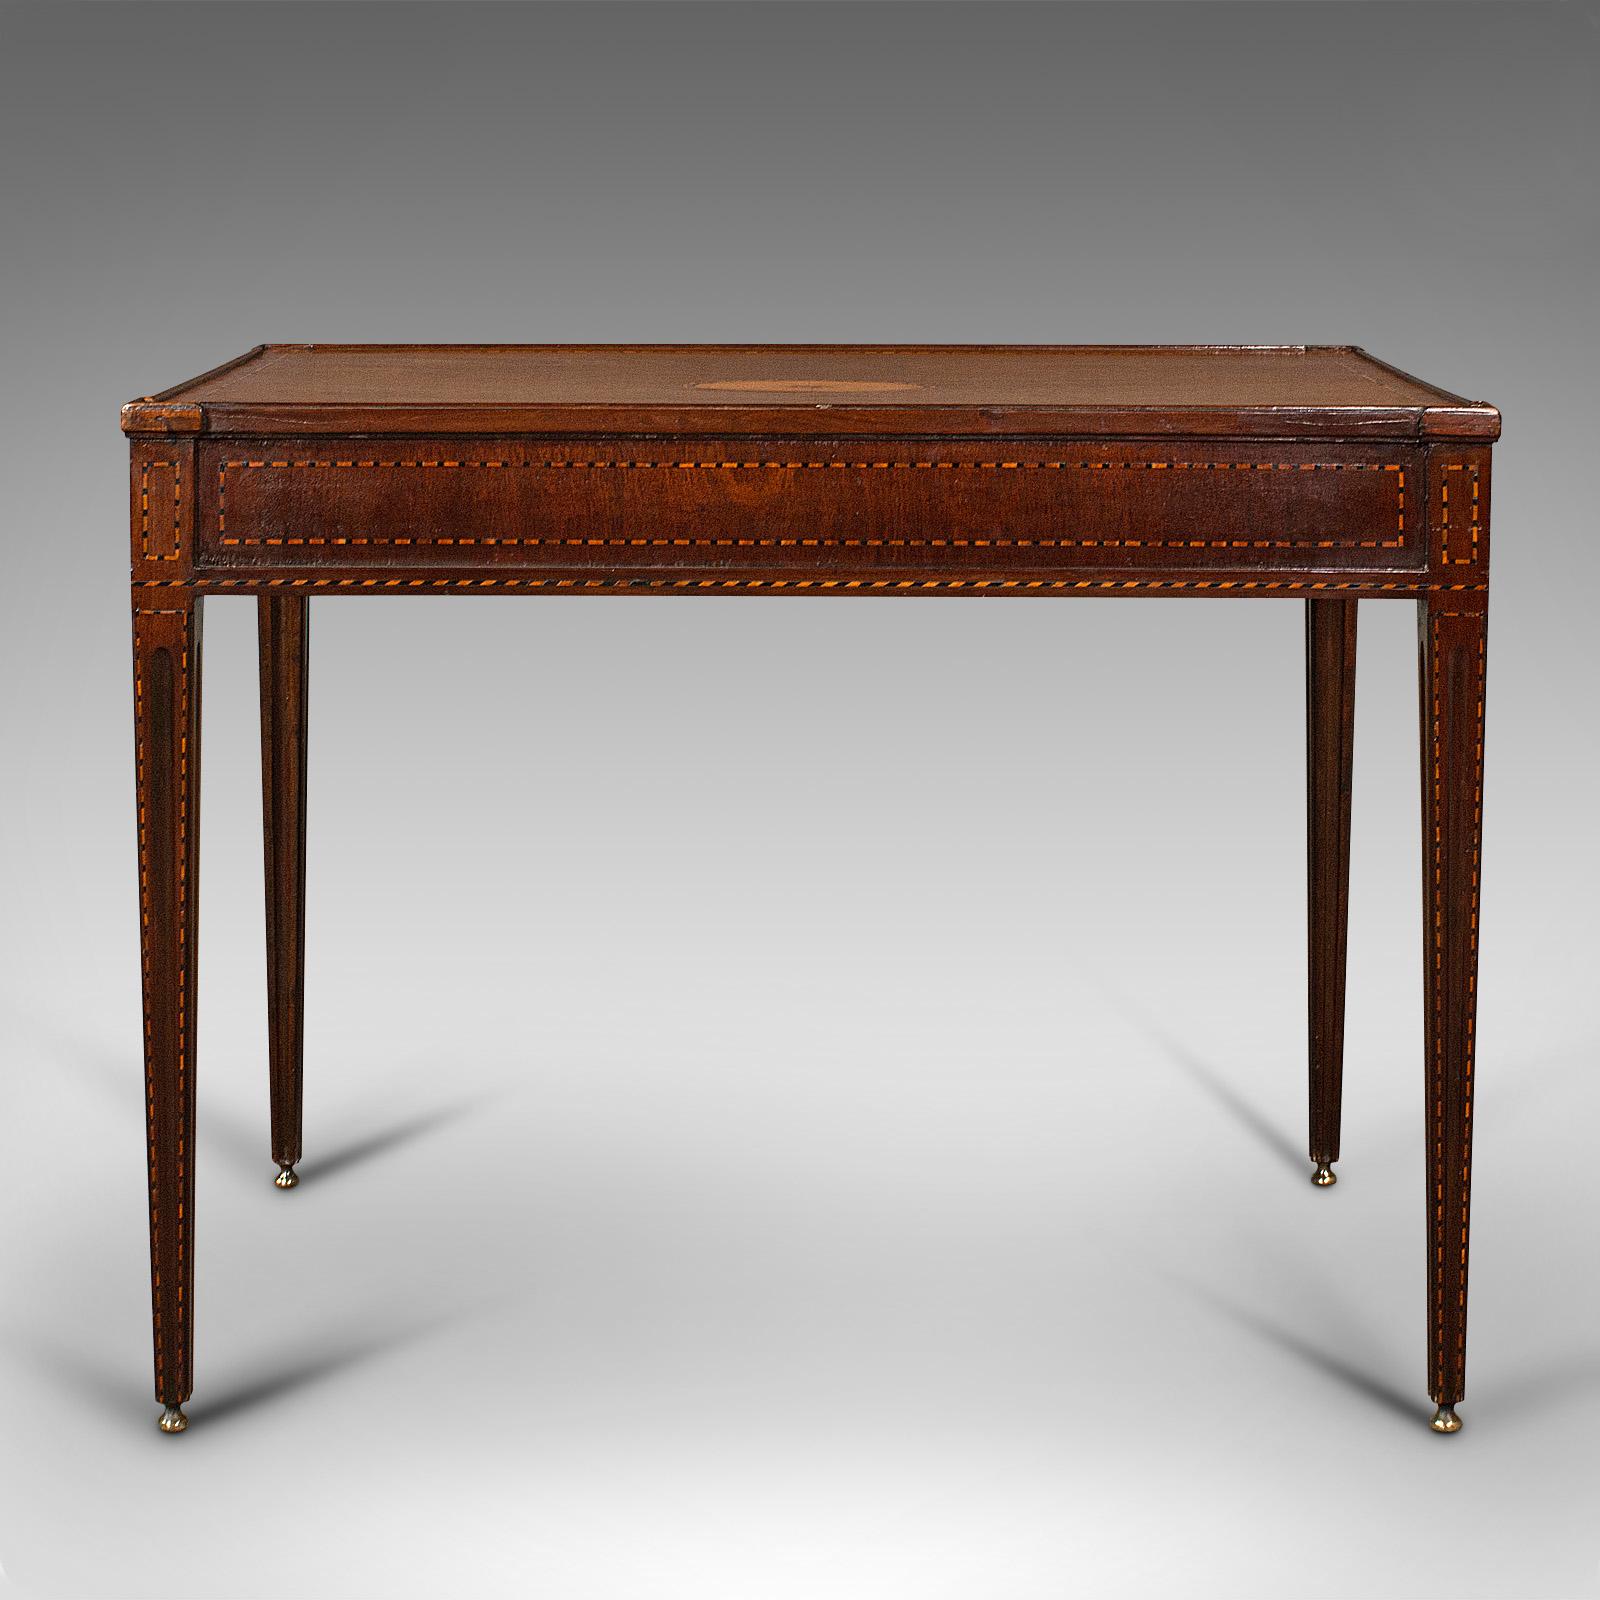 18th Century Antique Silver Table, English, Inlaid, Display, Writing Desk, Georgian, C.1780 For Sale